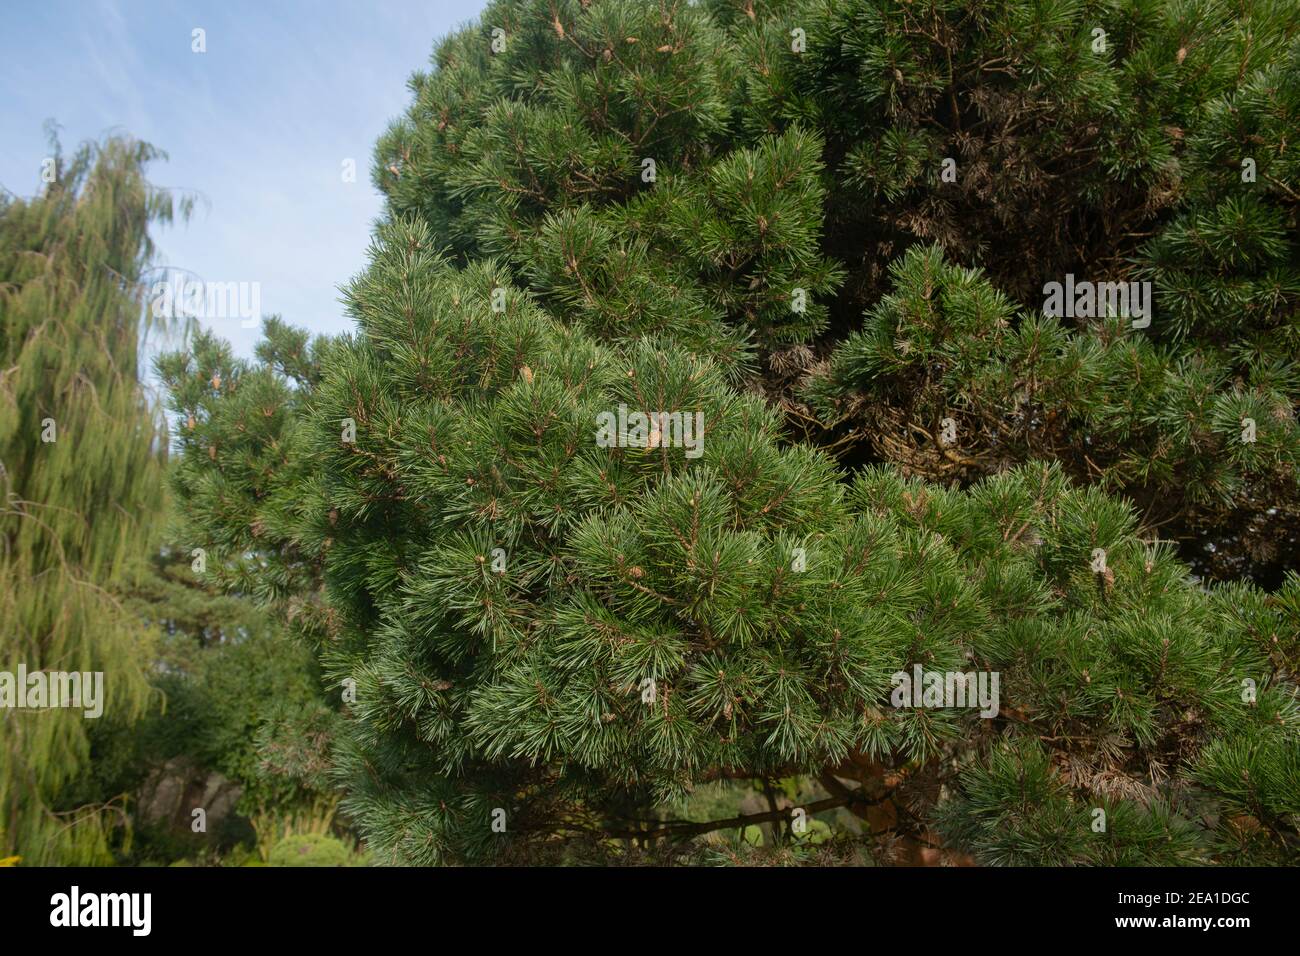 Lush Green Winter Foliage of an Evergreen Conifer Dwarf Scots Pine Tree (Pinus sylvestris 'Chantry Blue') Growing in a Country Cottage Garden in Devon Stock Photo